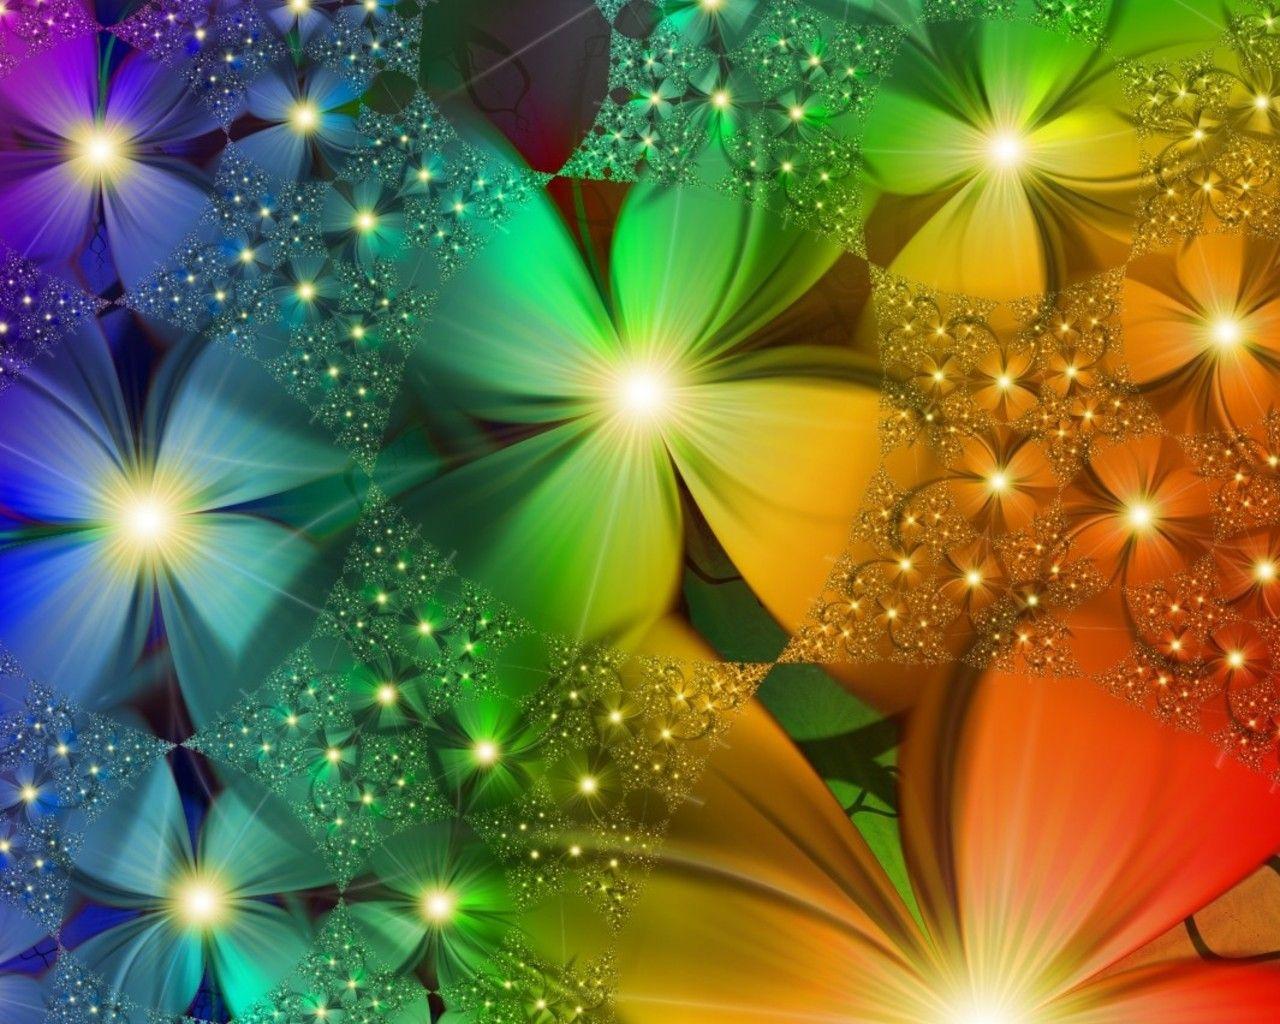 3D Colorful Wallpaper Background Best HD. Best Image Background